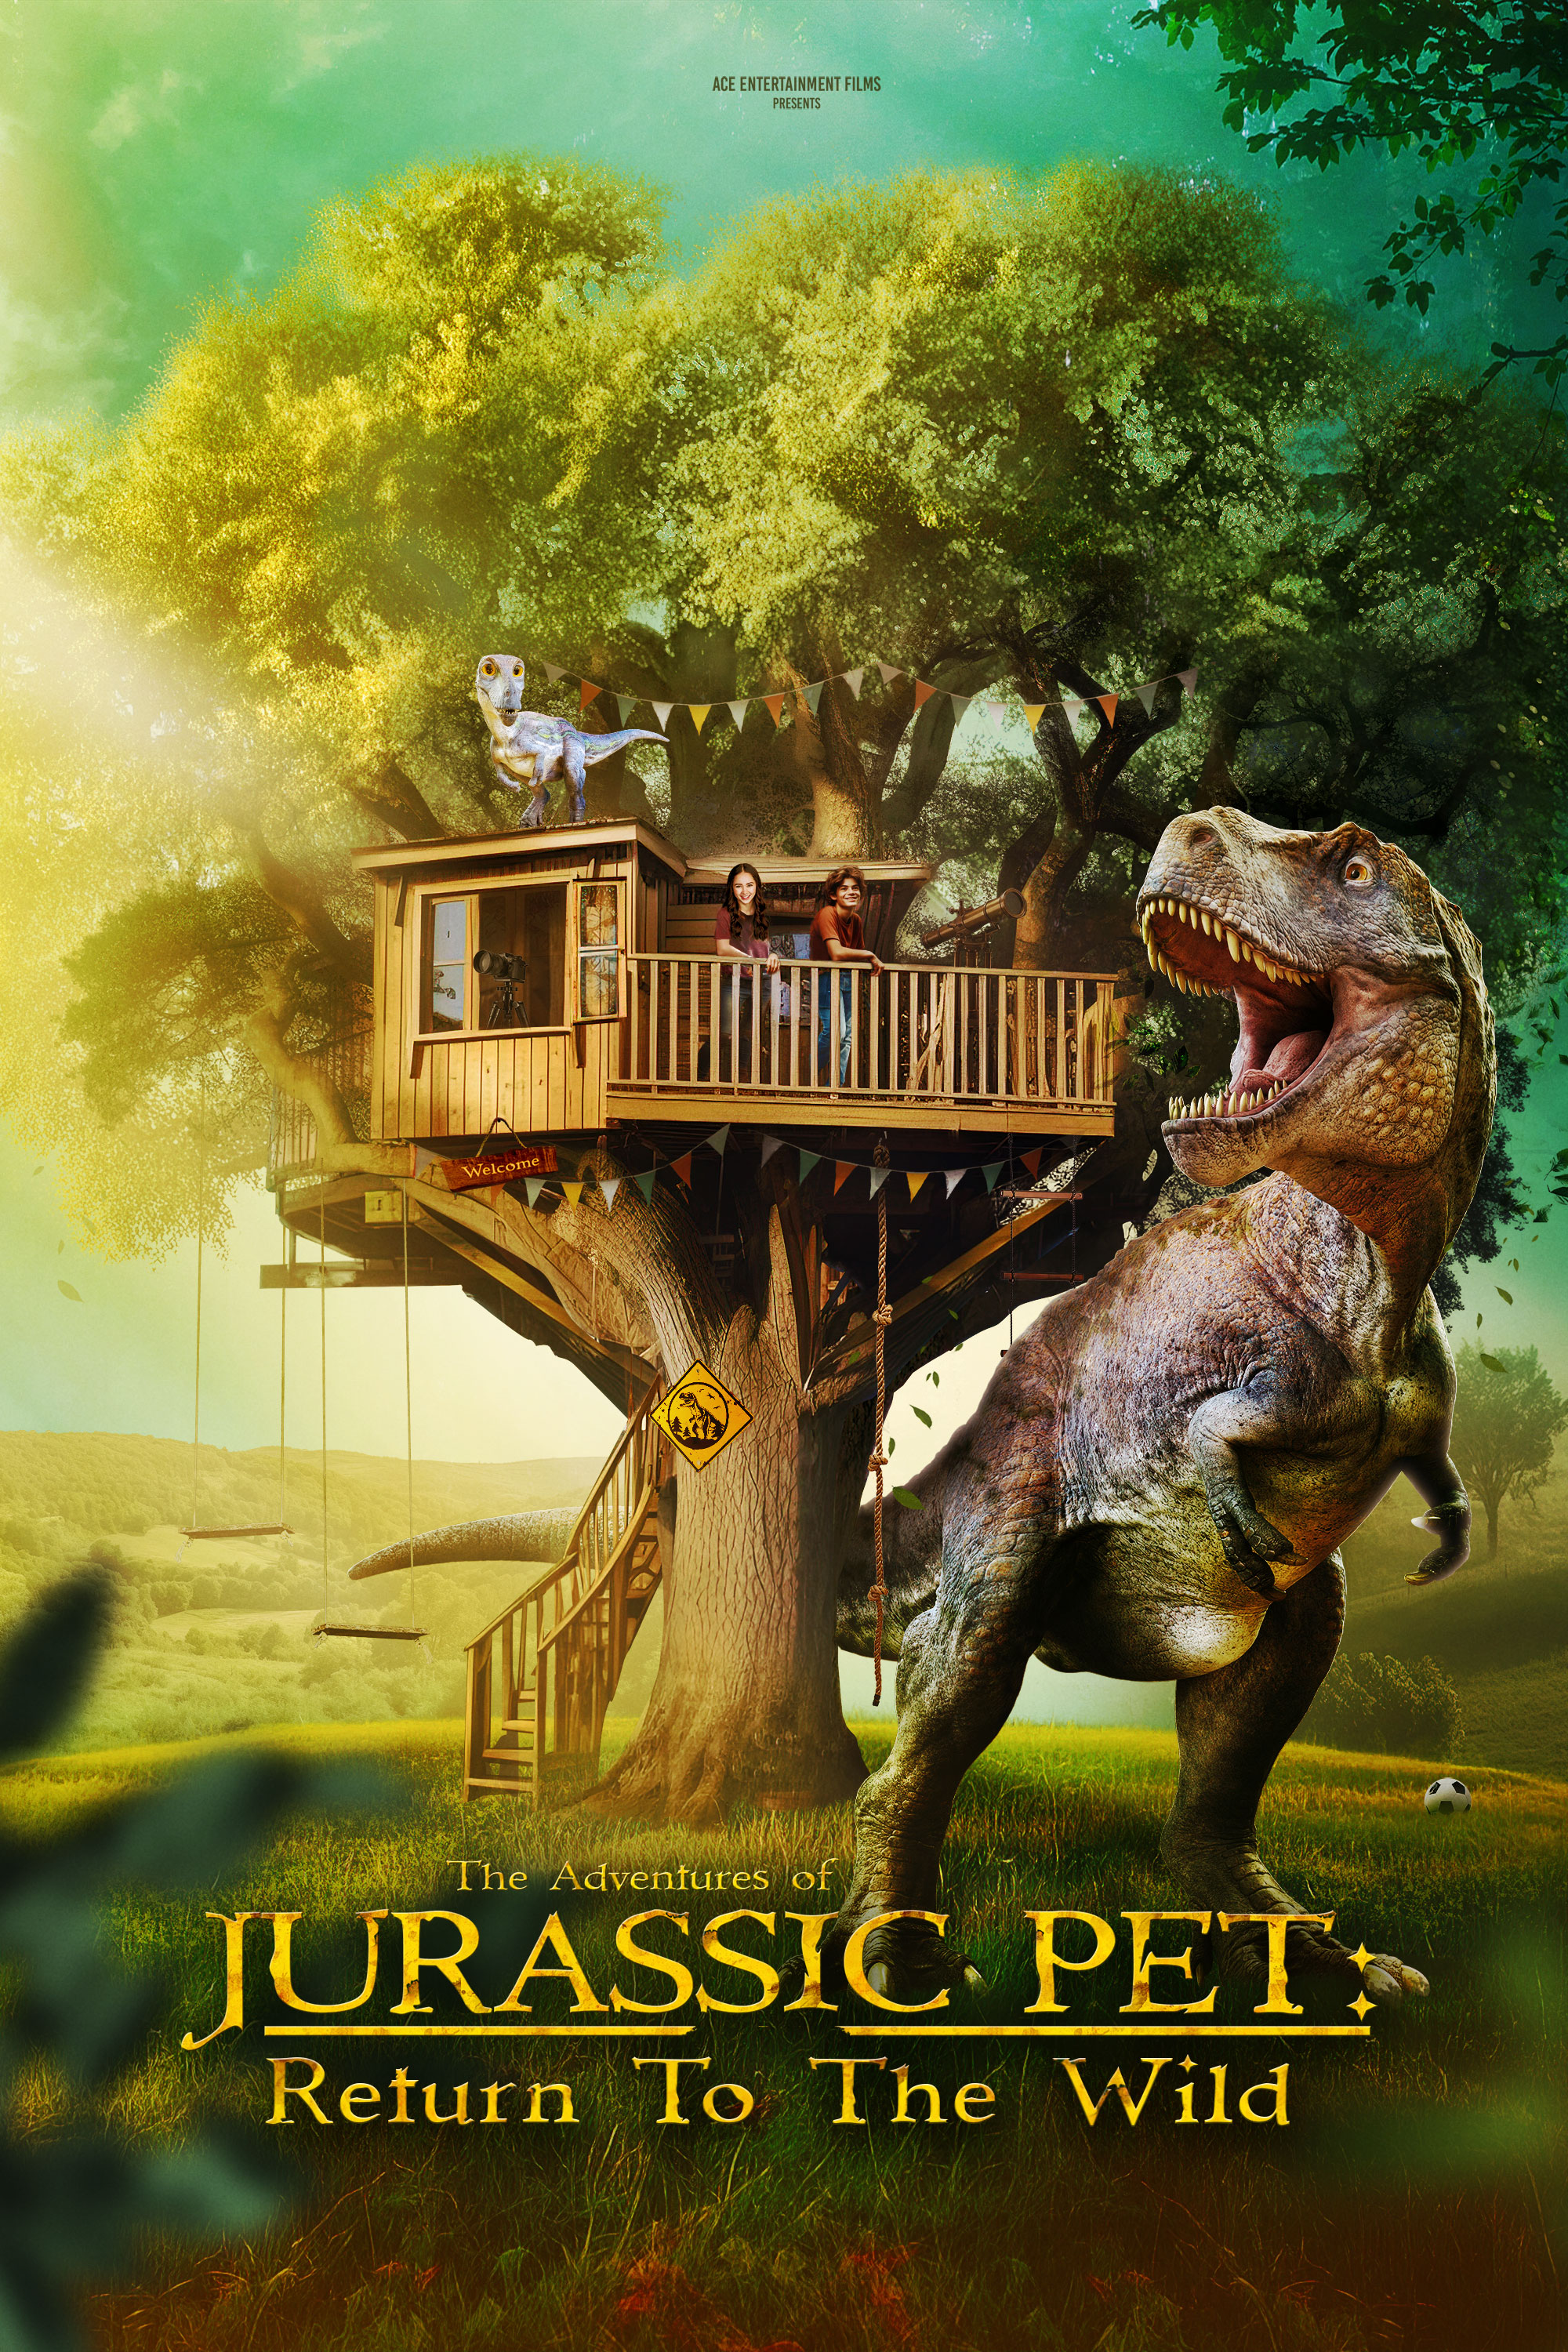 The Adventures of Jurassic Pet: Return to the Wild